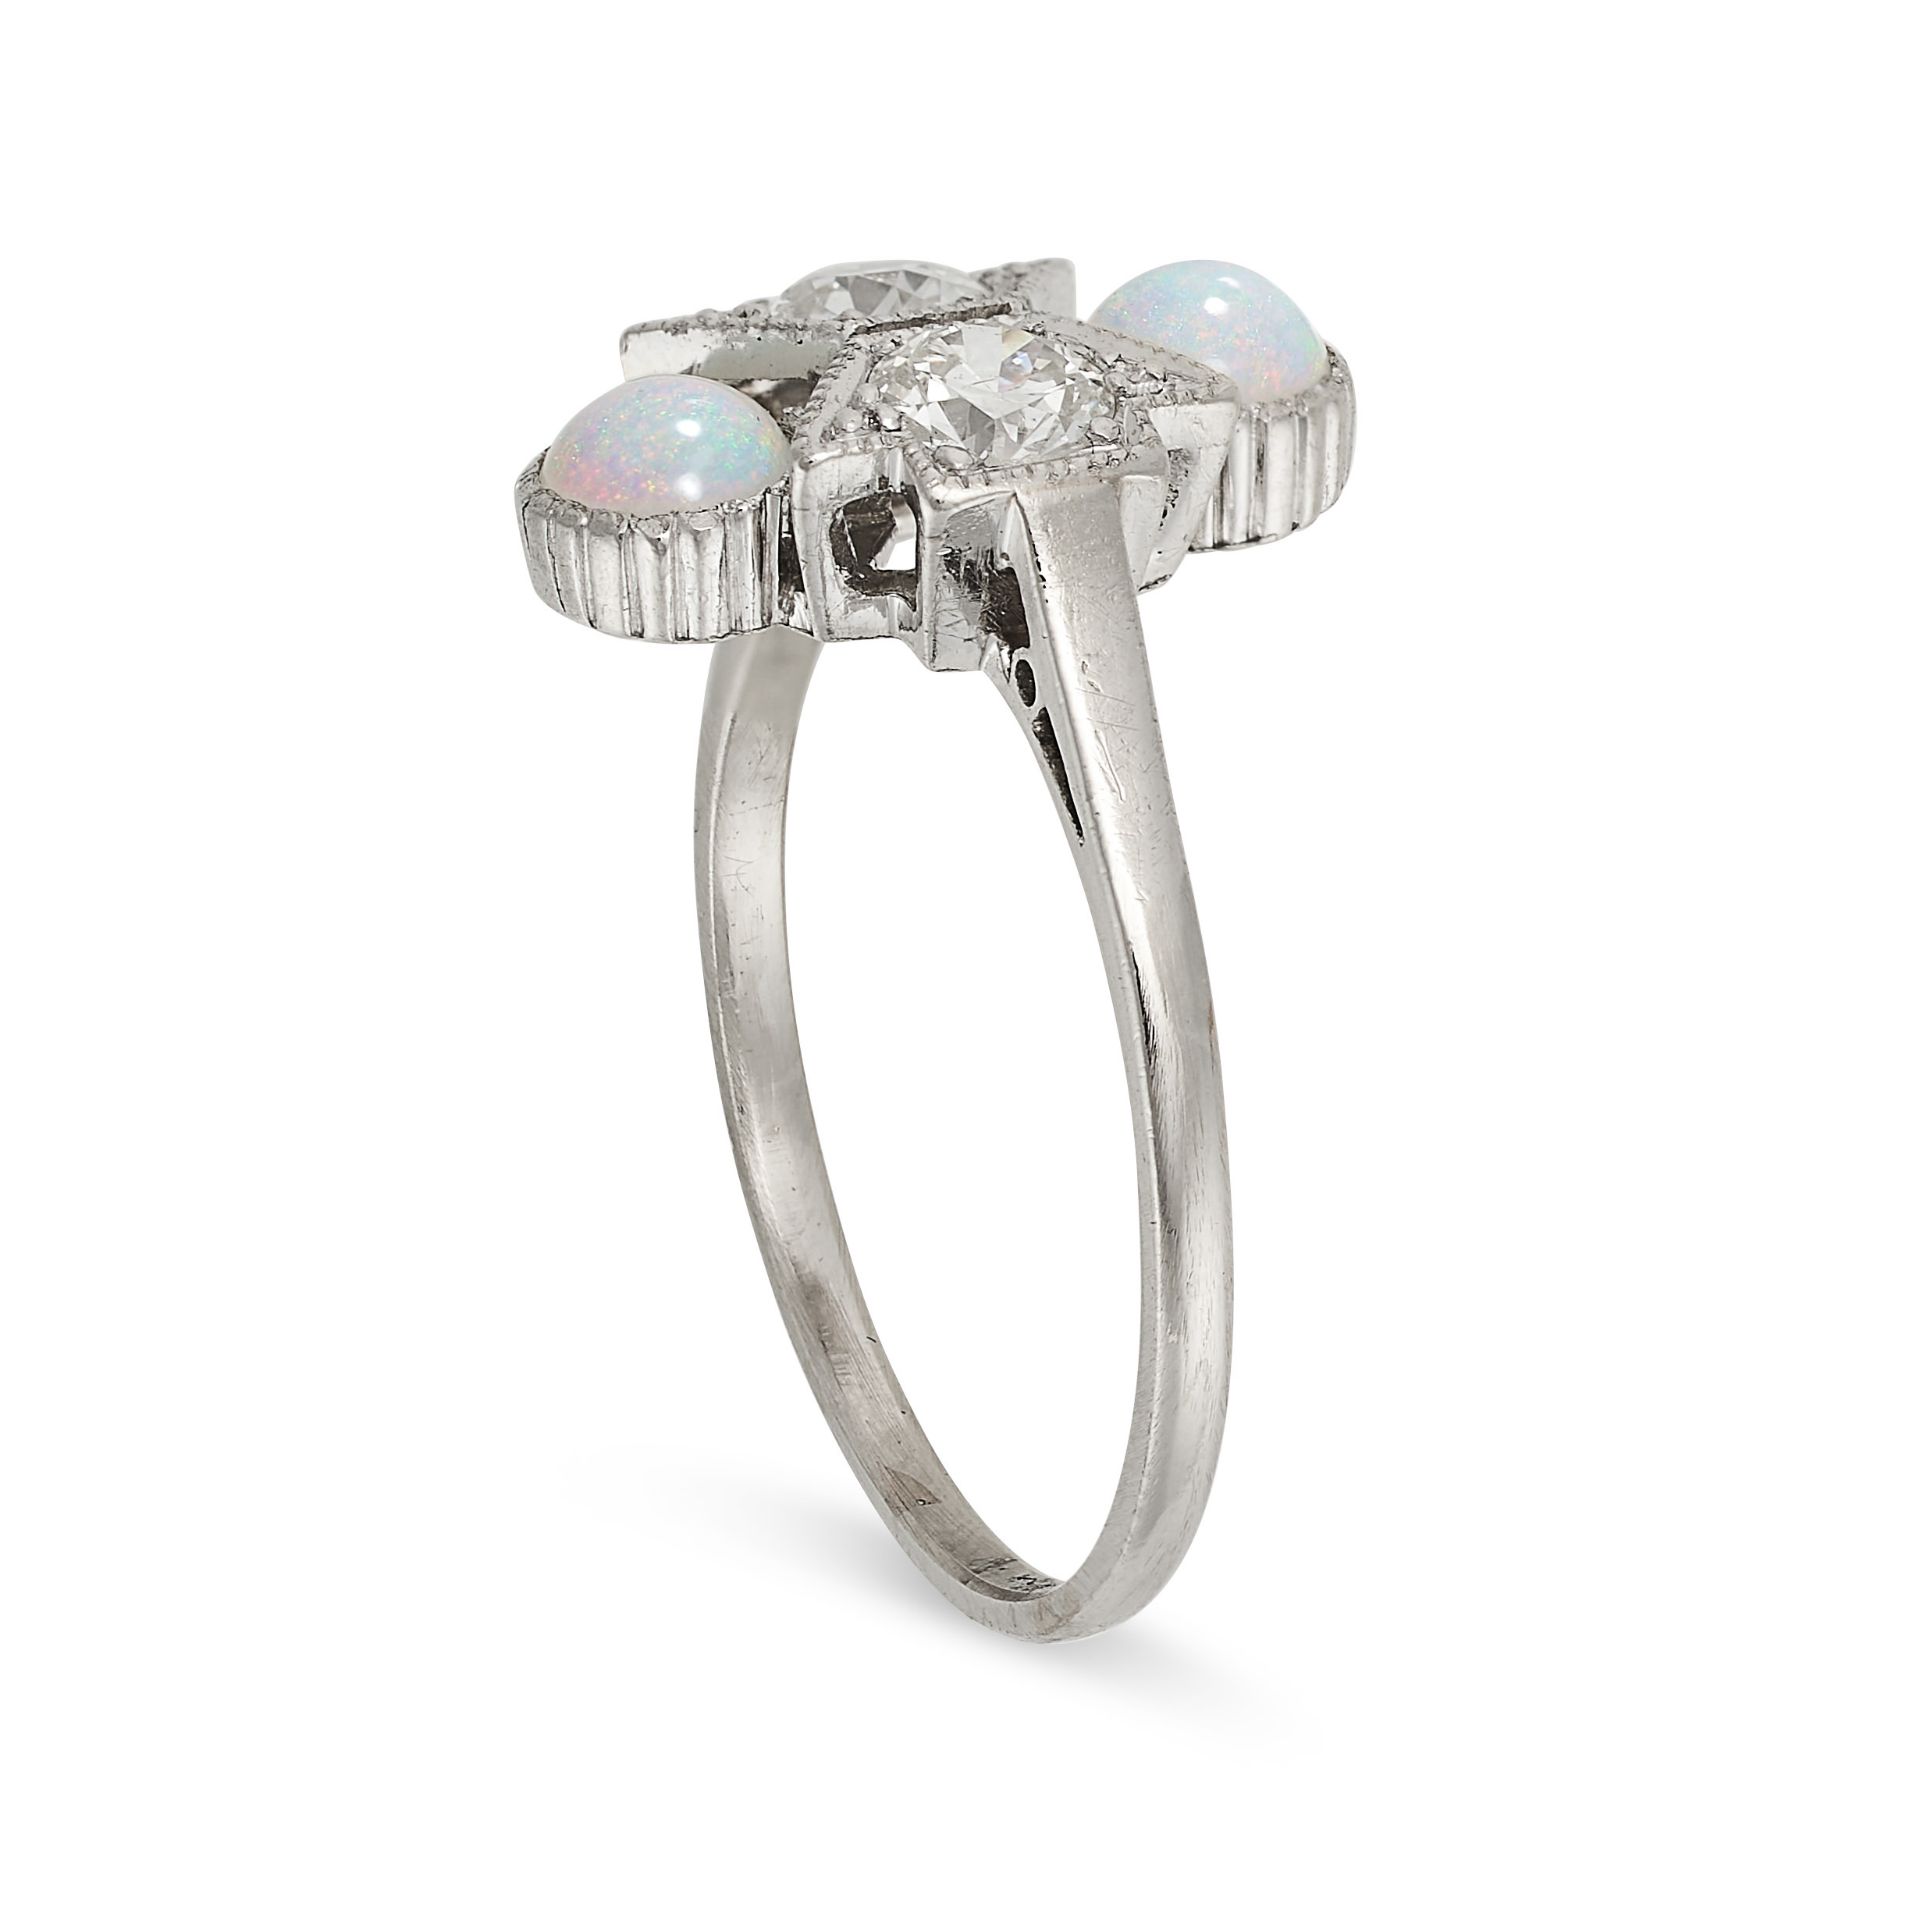 AN OPAL AND DIAMOND DRESS RING in platinum, set with two cabochon opals and two old cut diamonds, - Image 2 of 2